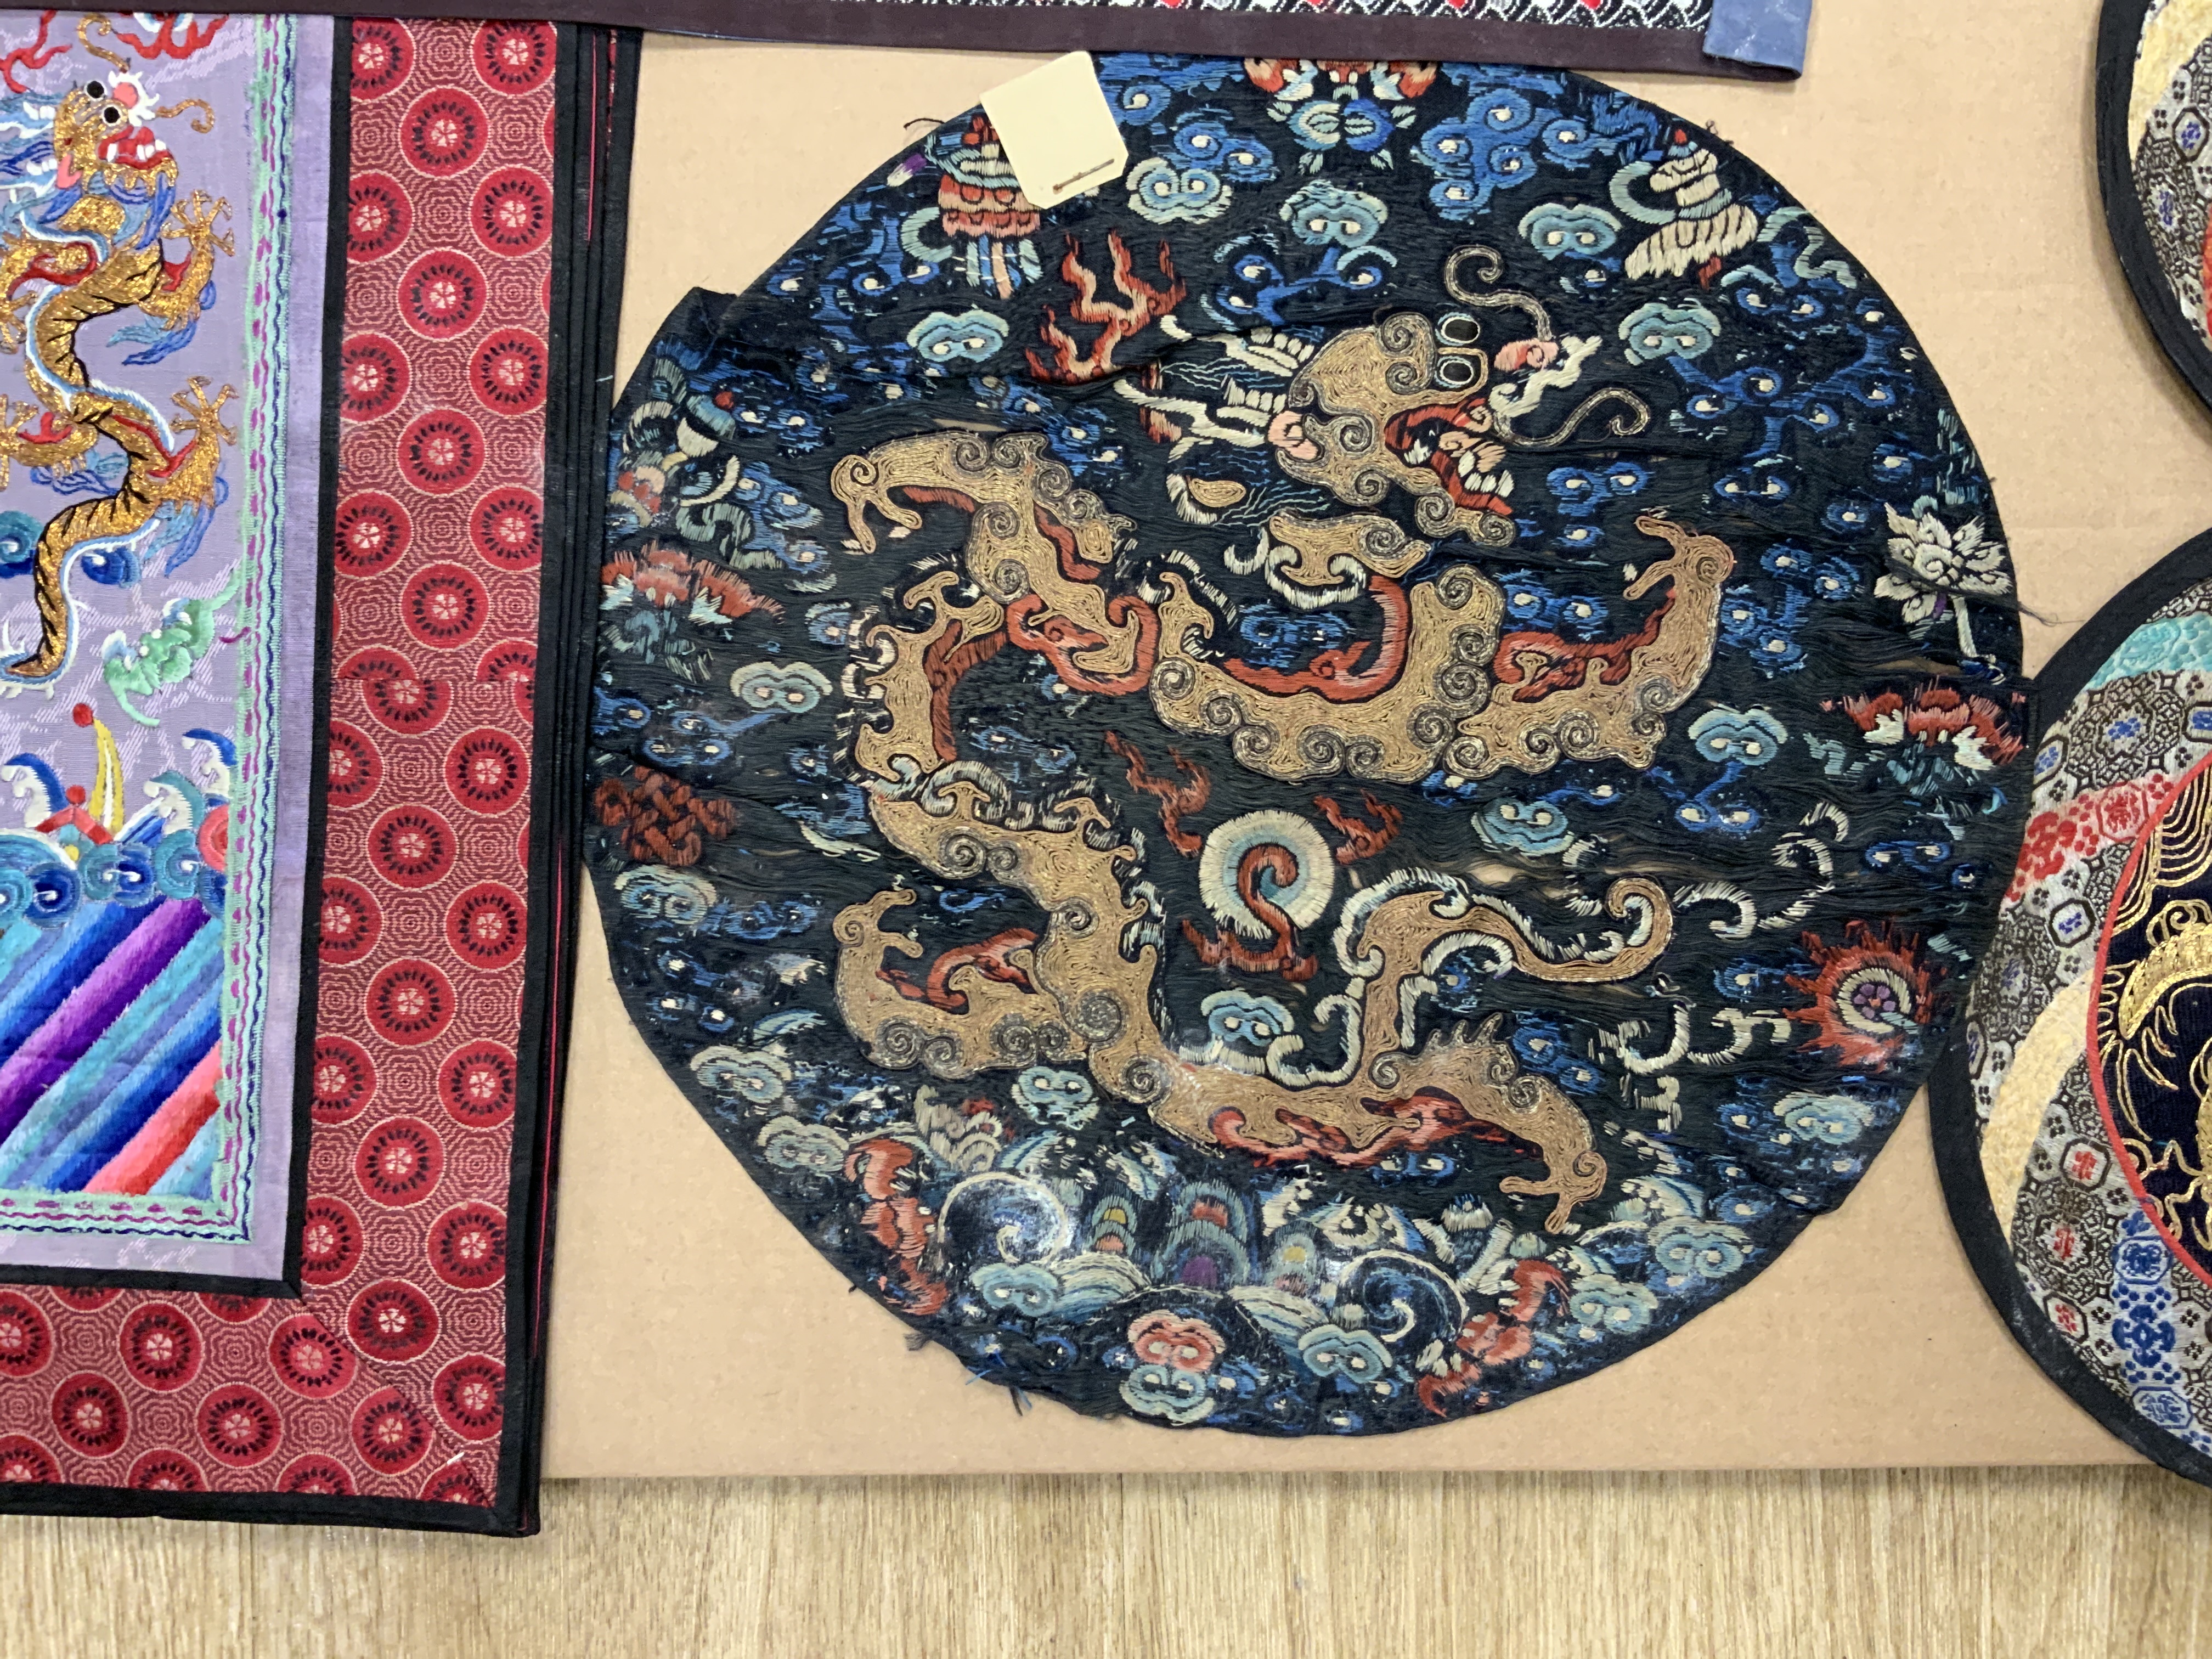 A group of five Chinese gold thread and polychrome silk embroidered circular mats, embroidered with central gold thread dragons four bordered in silk brocade, together with a set of four rectangular similar embroidered g